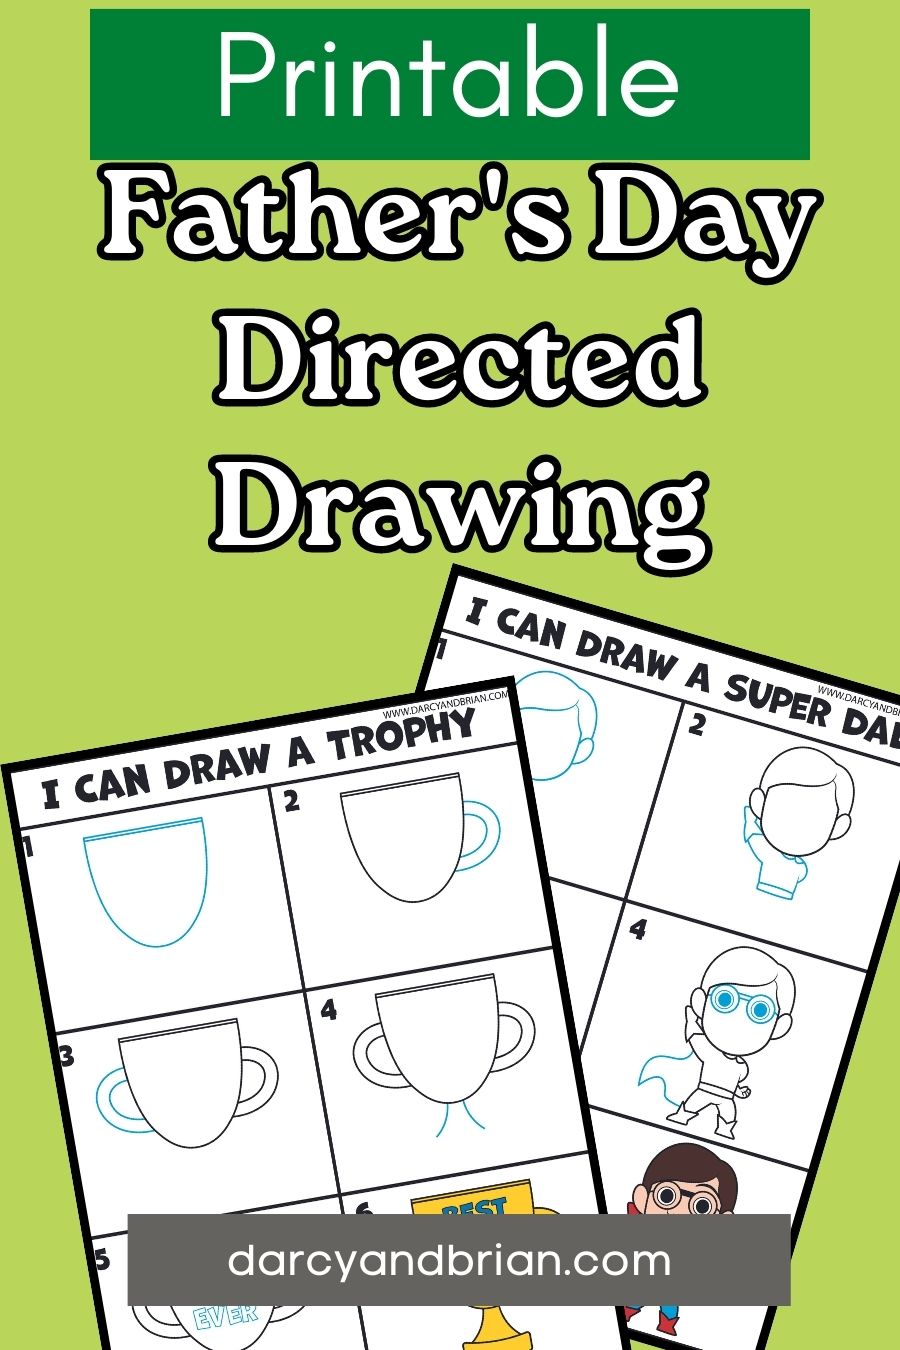 Fathers Day Directed Drawing - Free Printable - Sixth Bloom-saigonsouth.com.vn